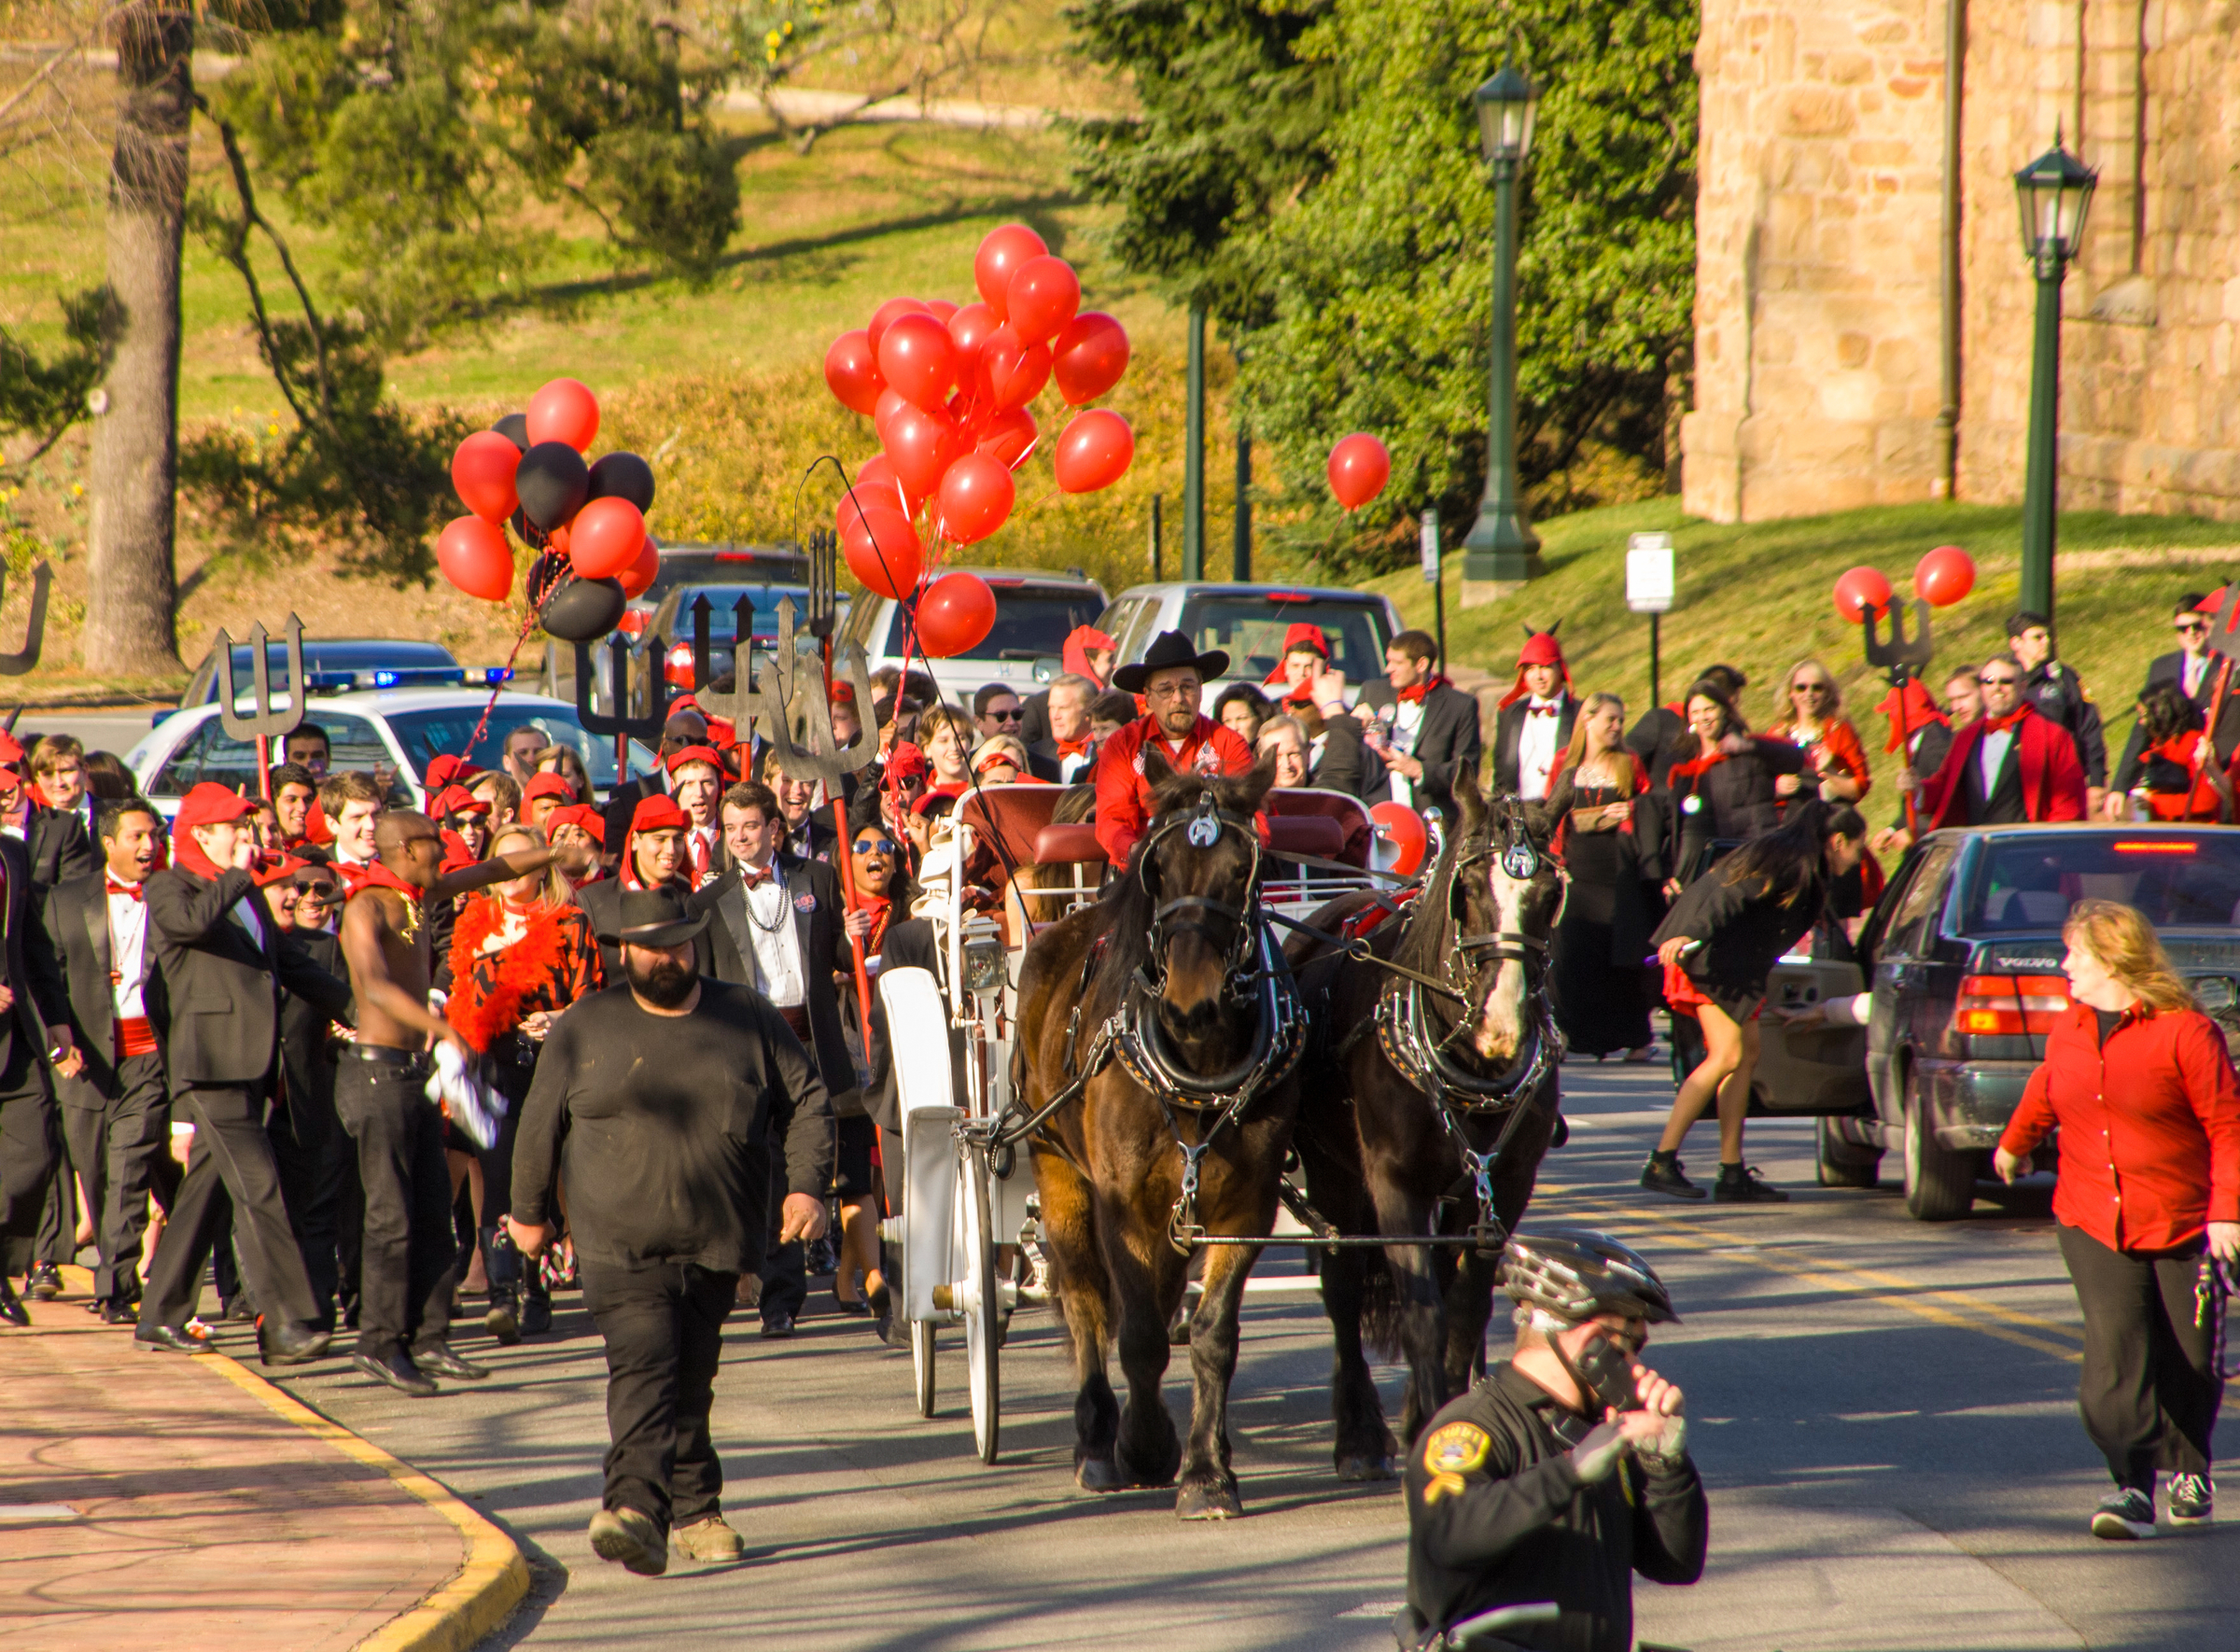 Crowd walking the street at UVA Wise wearing black and red behind a horse drawn carriage